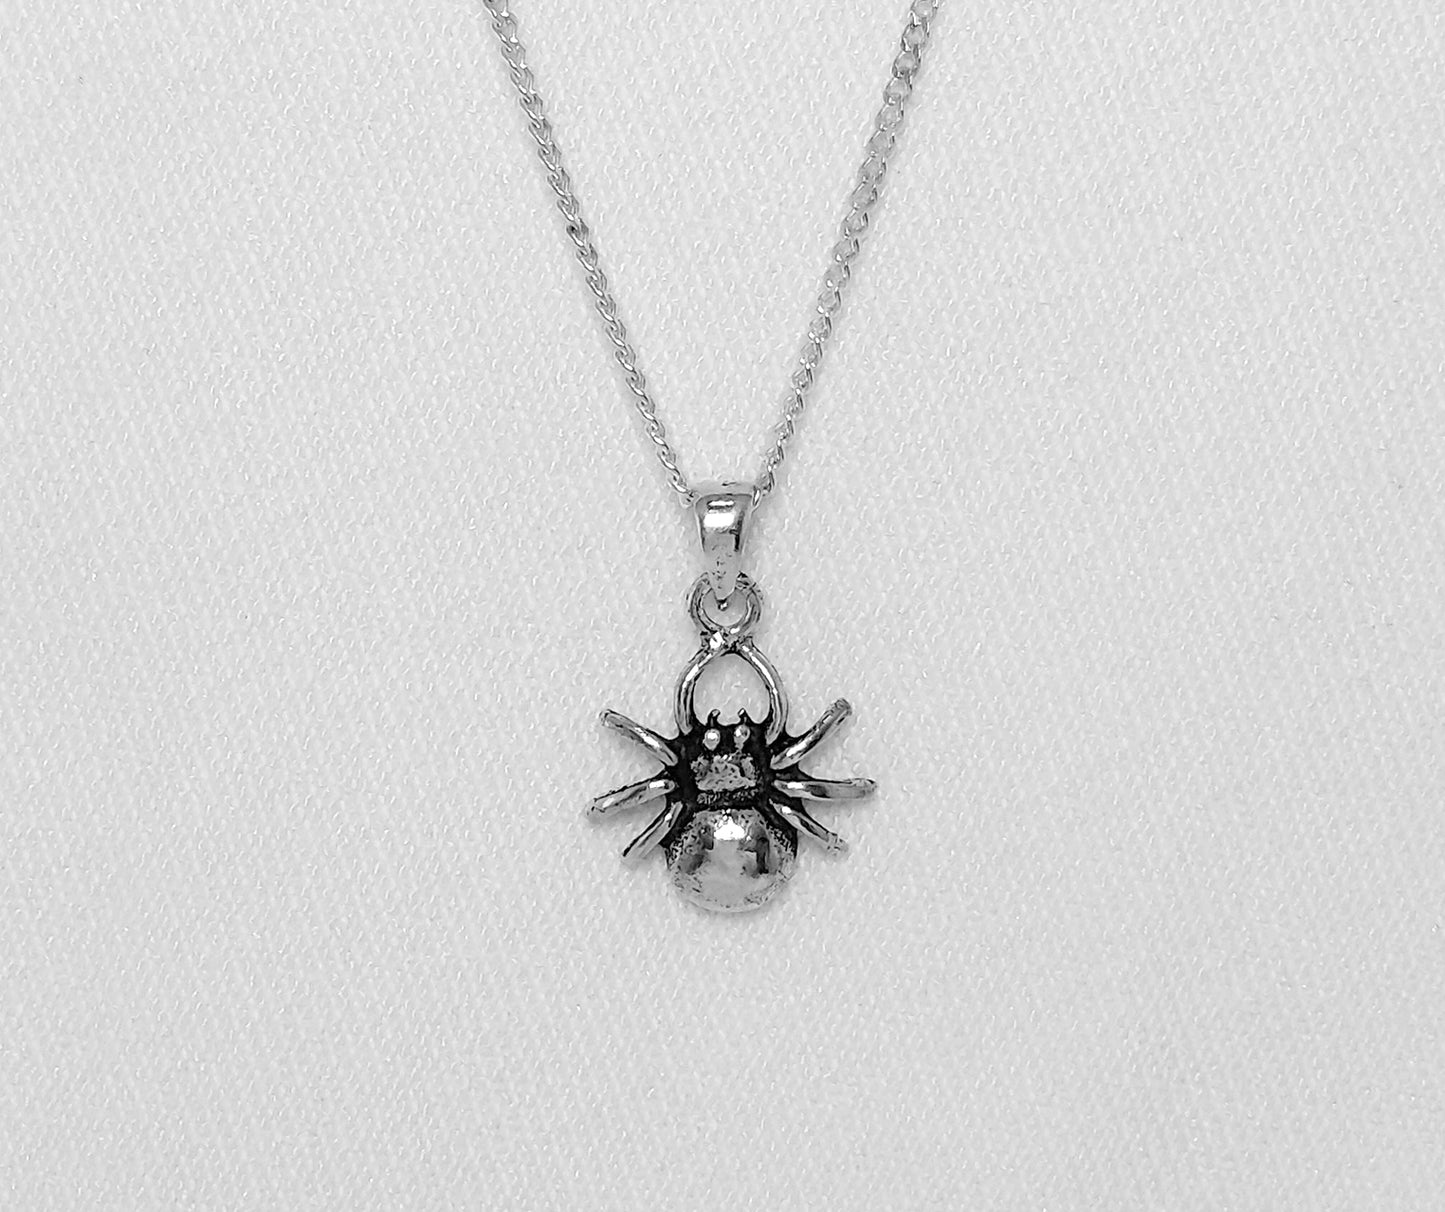 Sterling Silver Spider Pendant or Charm